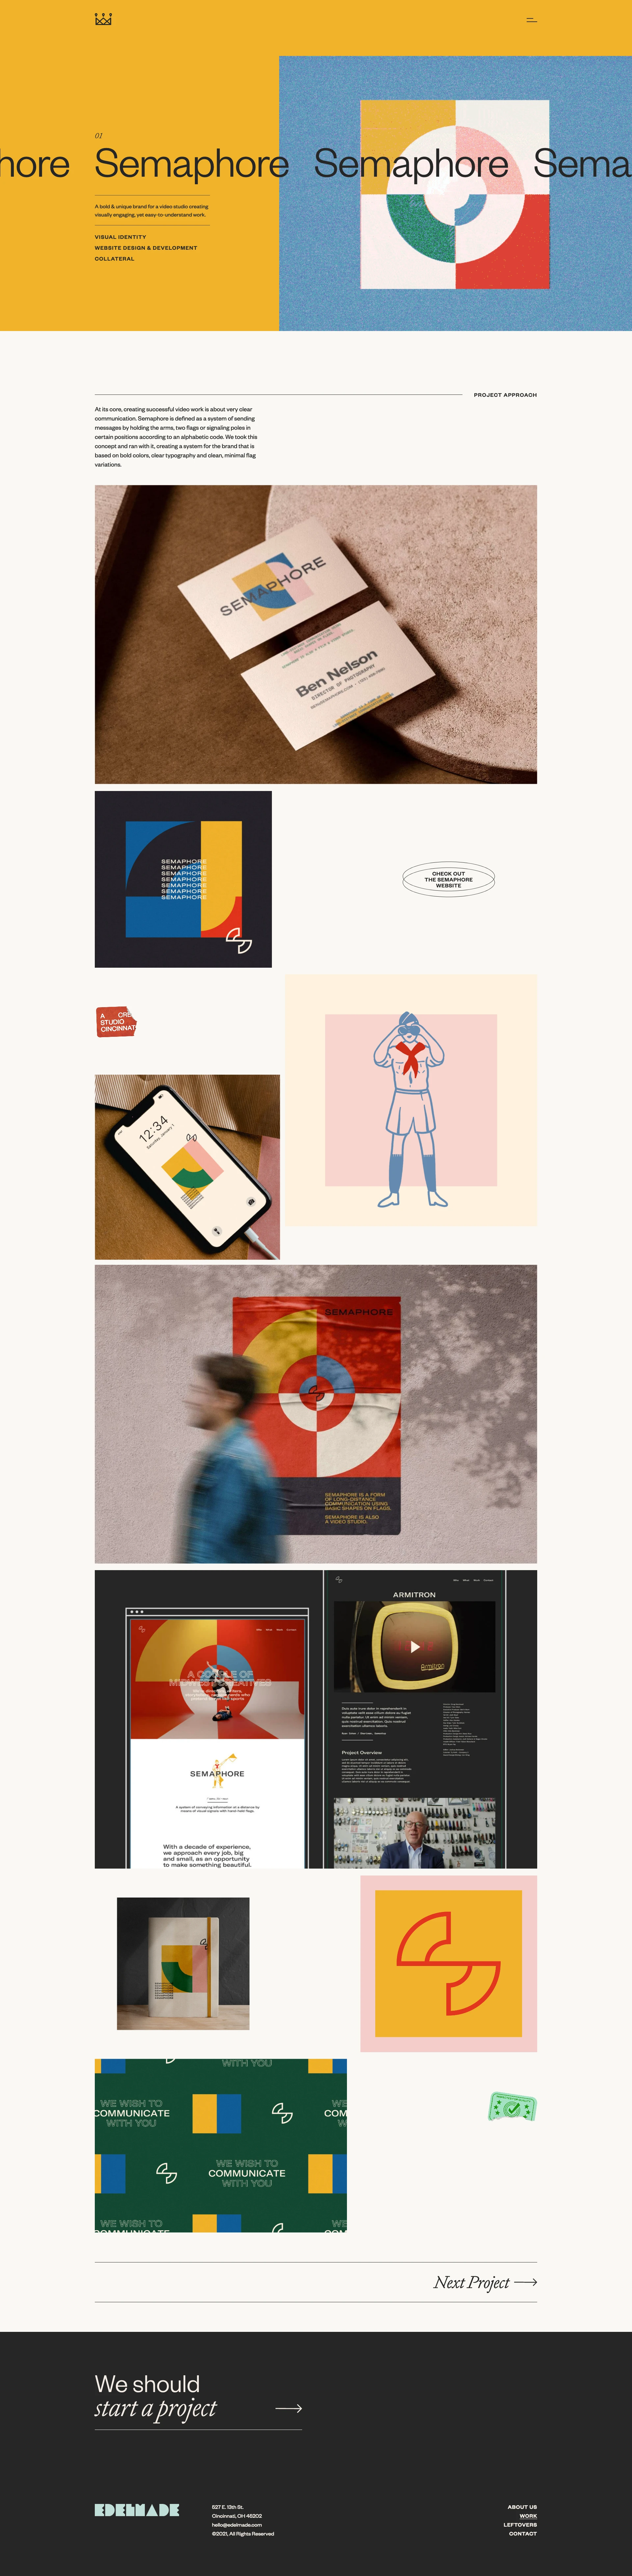 Edelmade Landing Page Example: Marrying thoughtful ideas & imaginative creativity, we design impactful brands & digital experiences with the goal of bringing more good into the world.